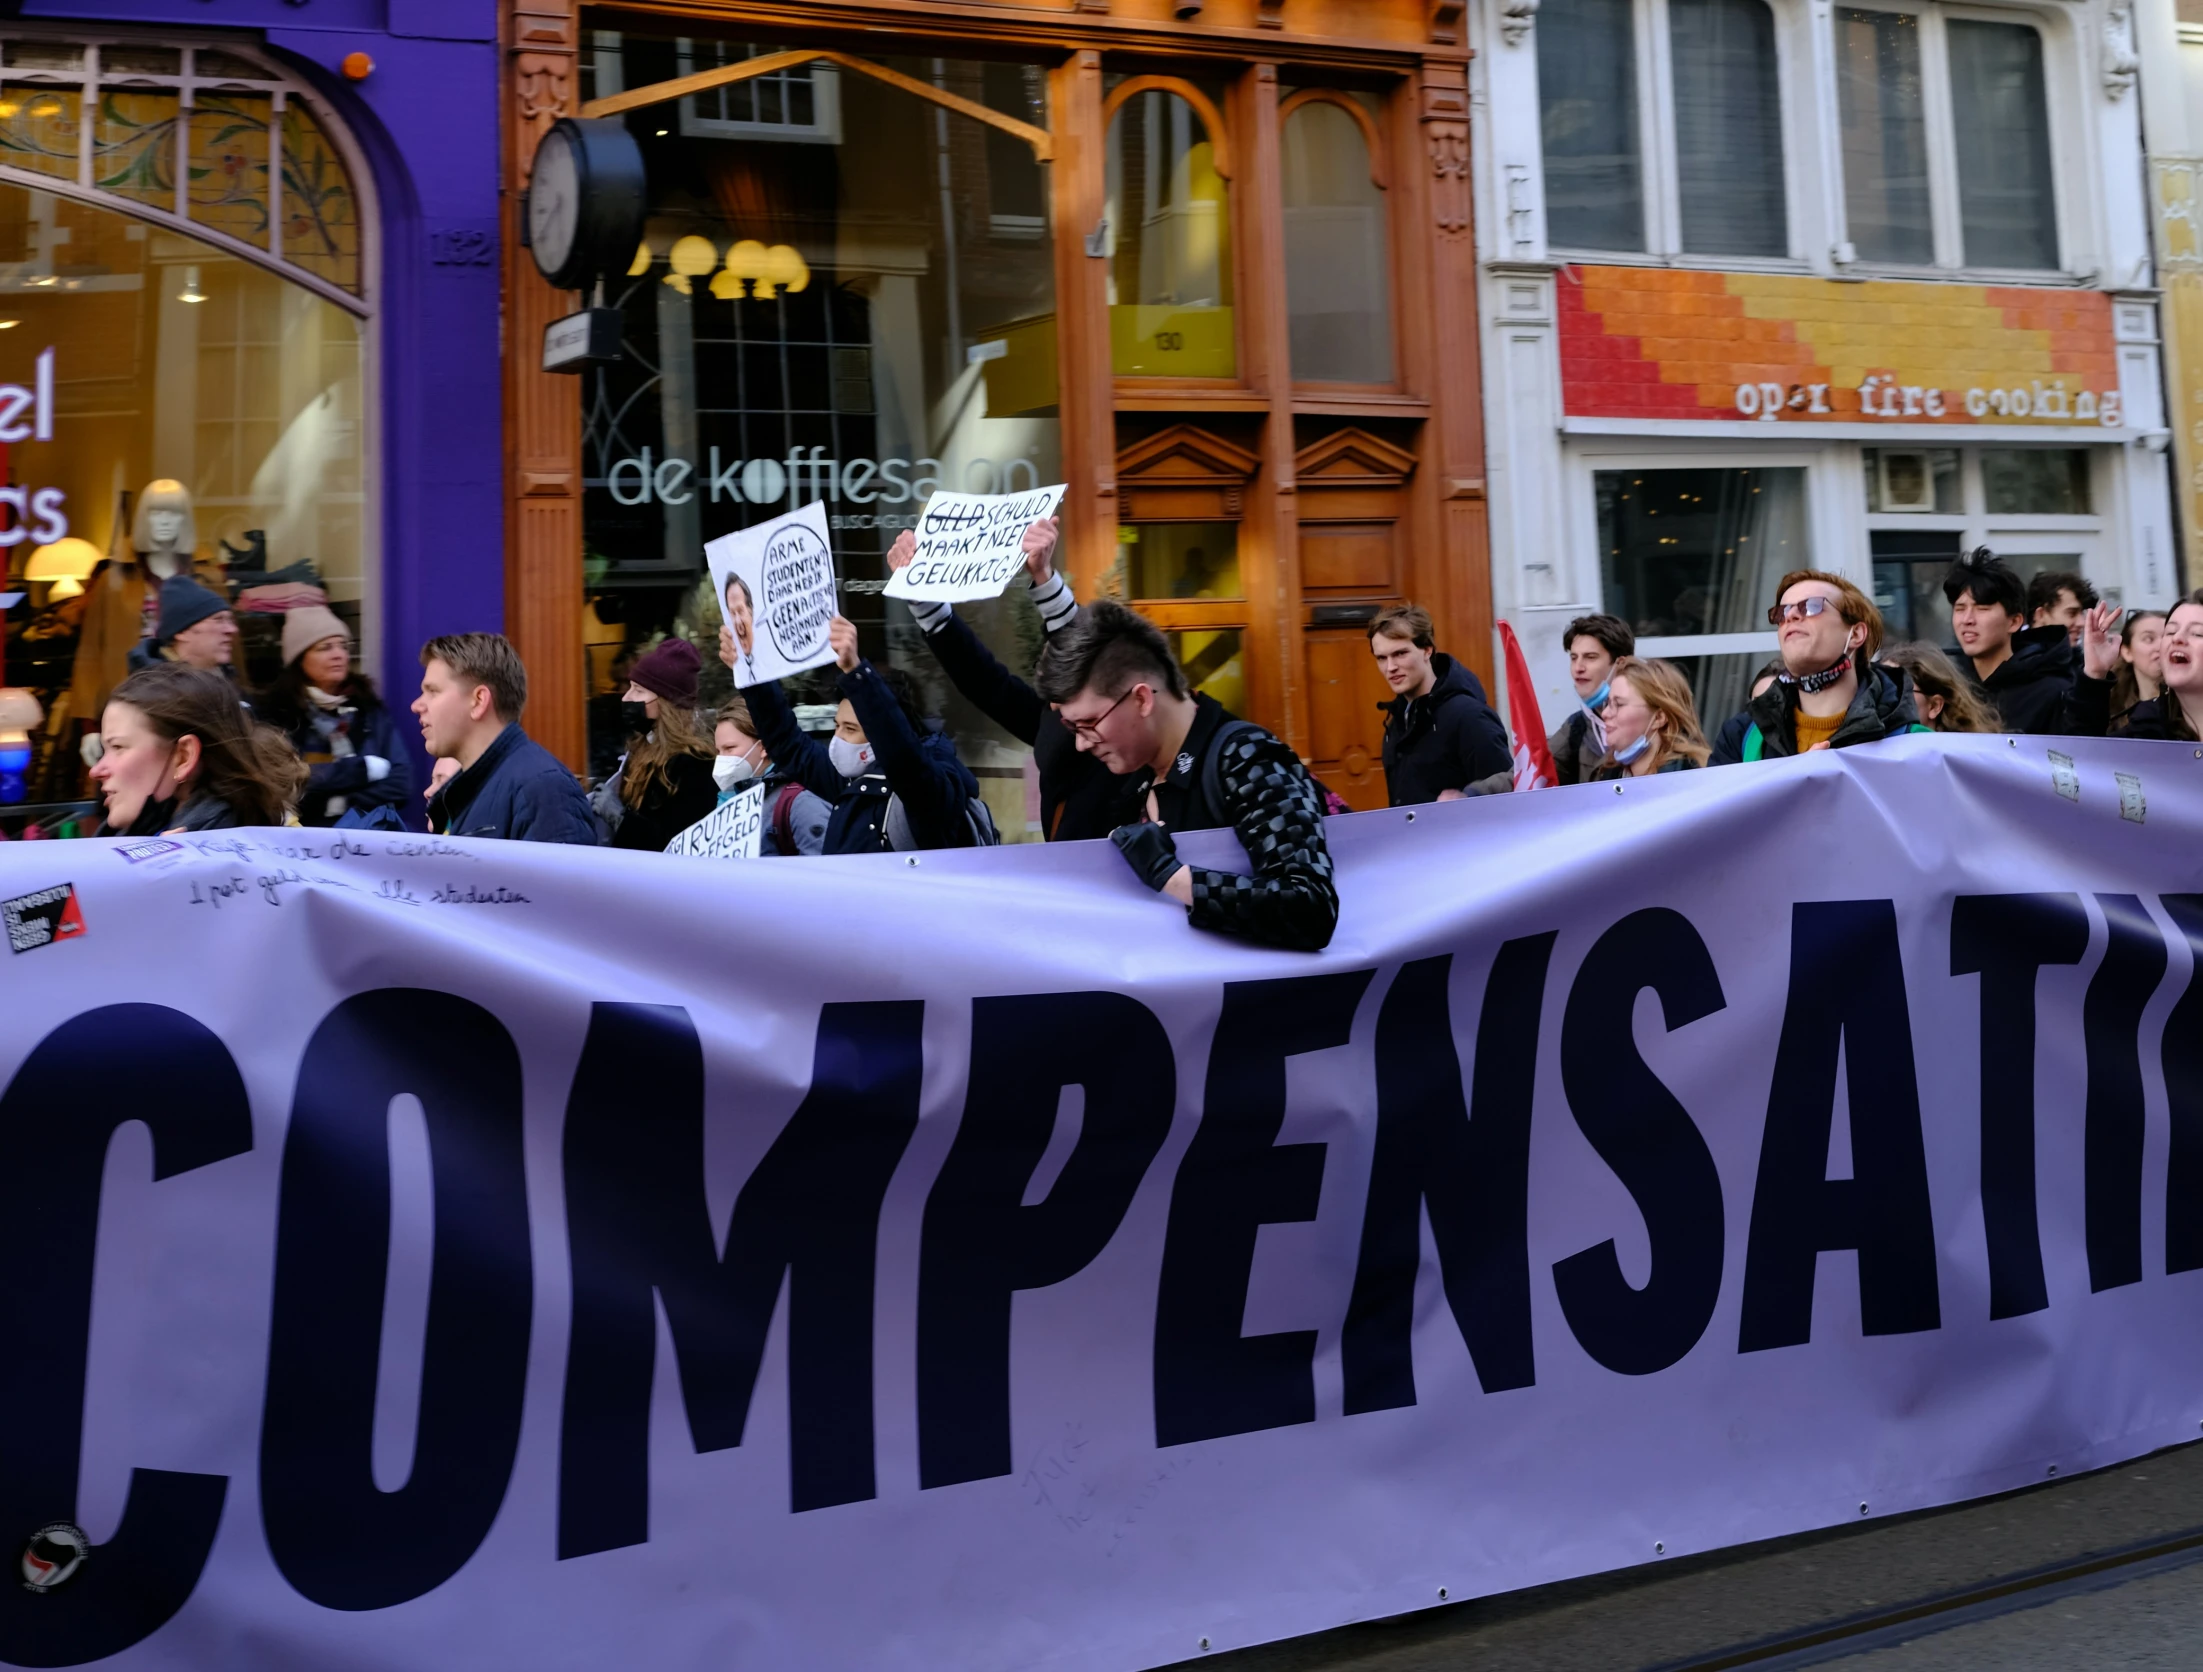 a crowd of people stand in front of a store, while one person holds up a sign that says compensata